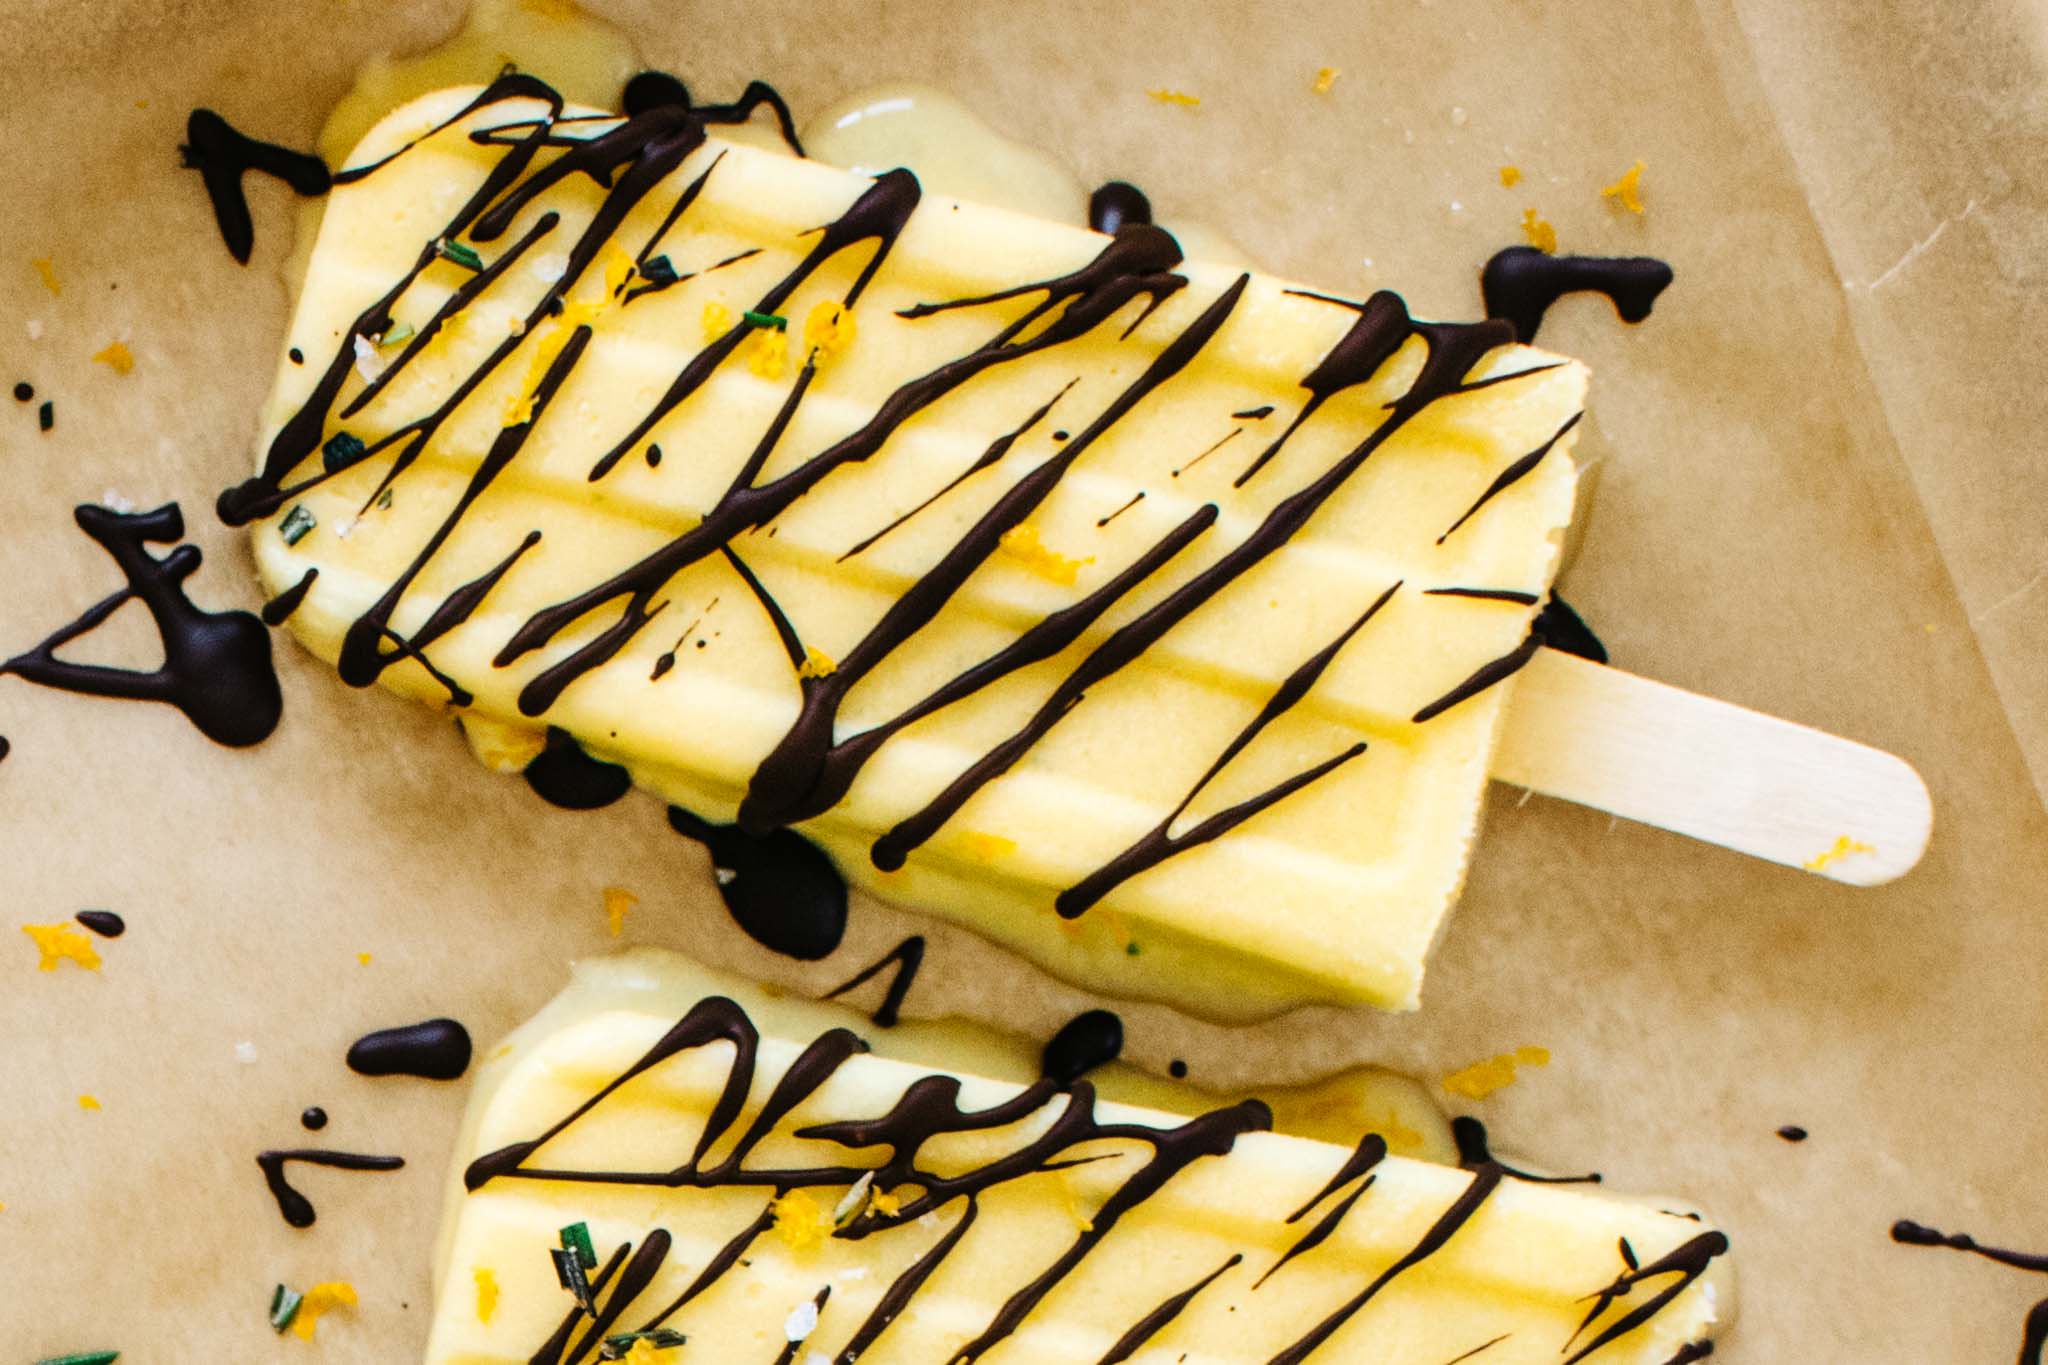 Sweet Orange & Rosemary Creamsicles with Salty Chocolate Drizzle from Kale & Caramel: Recipes for Body, Heart, and Table